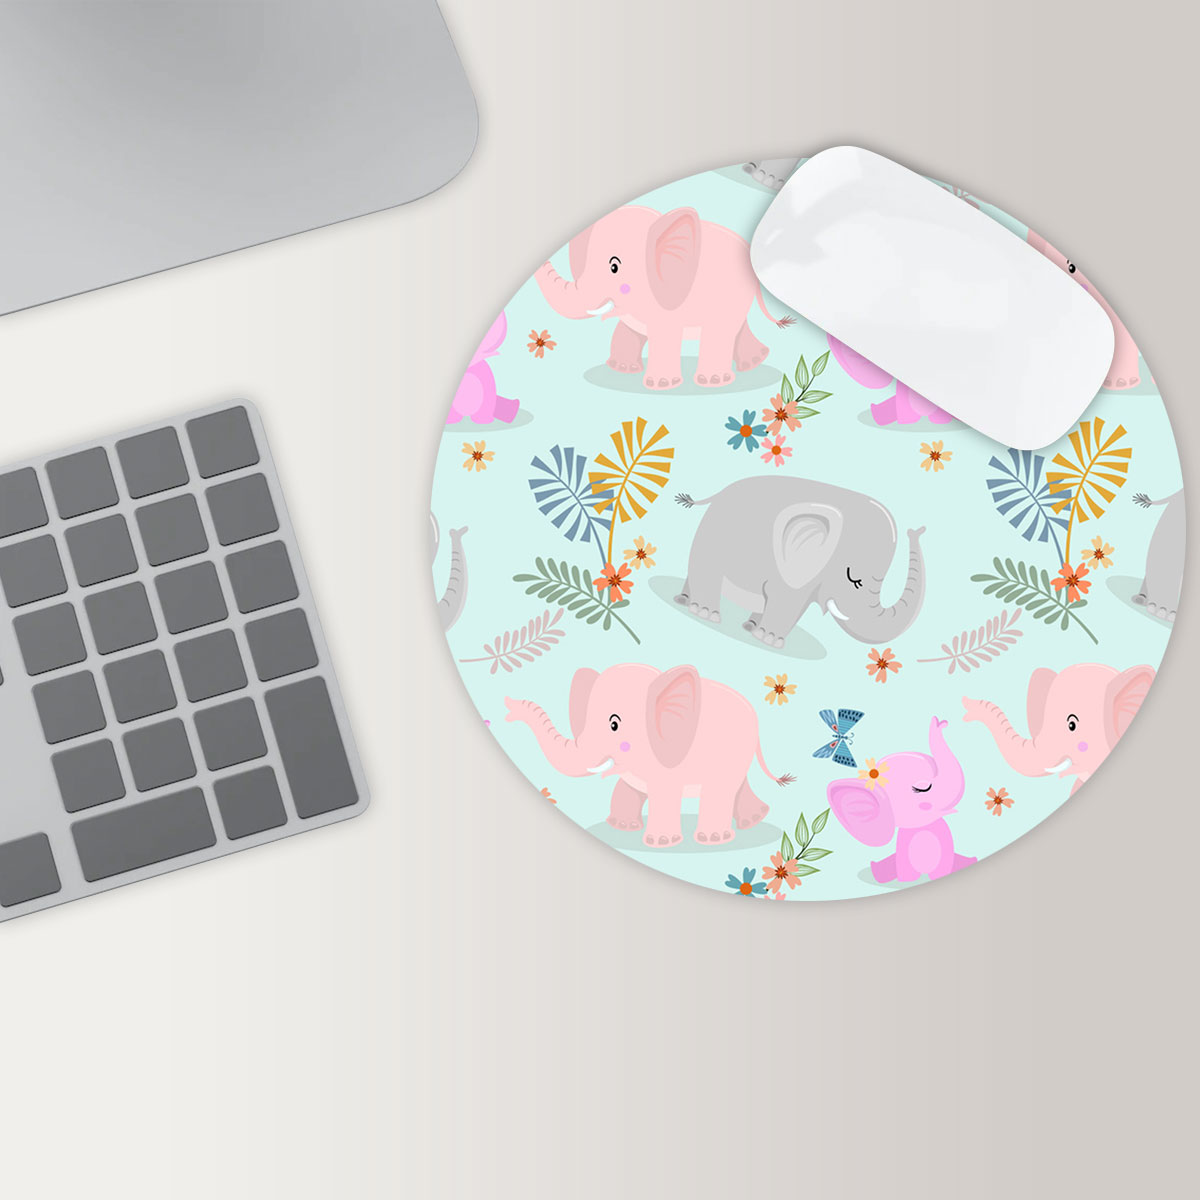 Lovely Asian Elephant Family Round Mouse Pad 6